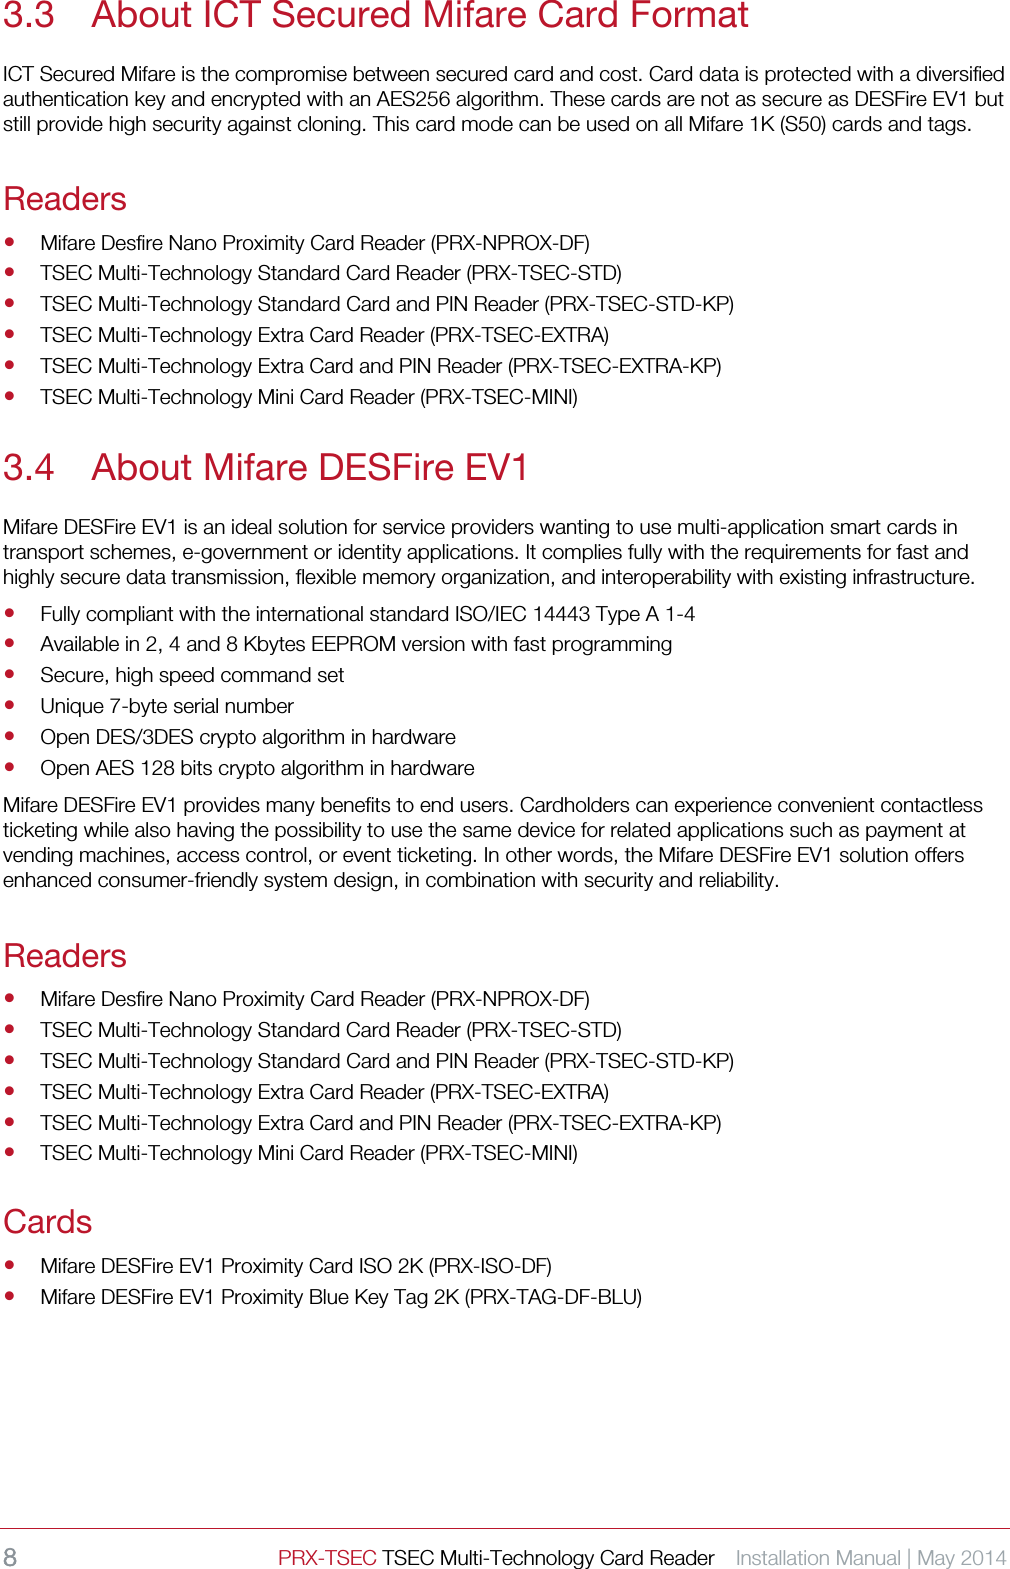 8 PRX-TSEC TSEC Multi-Technology Card Reader    Installation Manual | May 2014    3.3 About ICT Secured Mifare Card Format ICT Secured Mifare is the compromise between secured card and cost. Card data is protected with a diversified authentication key and encrypted with an AES256 algorithm. These cards are not as secure as DESFire EV1 but still provide high security against cloning. This card mode can be used on all Mifare 1K (S50) cards and tags. Readers  Mifare Desfire Nano Proximity Card Reader (PRX-NPROX-DF)  TSEC Multi-Technology Standard Card Reader (PRX-TSEC-STD)  TSEC Multi-Technology Standard Card and PIN Reader (PRX-TSEC-STD-KP)  TSEC Multi-Technology Extra Card Reader (PRX-TSEC-EXTRA)  TSEC Multi-Technology Extra Card and PIN Reader (PRX-TSEC-EXTRA-KP)  TSEC Multi-Technology Mini Card Reader (PRX-TSEC-MINI) 3.4 About Mifare DESFire EV1 Mifare DESFire EV1 is an ideal solution for service providers wanting to use multi-application smart cards in transport schemes, e-government or identity applications. It complies fully with the requirements for fast and highly secure data transmission, flexible memory organization, and interoperability with existing infrastructure.    Fully compliant with the international standard ISO/IEC 14443 Type A 1-4    Available in 2, 4 and 8 Kbytes EEPROM version with fast programming  Secure, high speed command set  Unique 7-byte serial number  Open DES/3DES crypto algorithm in hardware  Open AES 128 bits crypto algorithm in hardware Mifare DESFire EV1 provides many benefits to end users. Cardholders can experience convenient contactless ticketing while also having the possibility to use the same device for related applications such as payment at vending machines, access control, or event ticketing. In other words, the Mifare DESFire EV1 solution offers enhanced consumer-friendly system design, in combination with security and reliability.   Readers  Mifare Desfire Nano Proximity Card Reader (PRX-NPROX-DF)  TSEC Multi-Technology Standard Card Reader (PRX-TSEC-STD)  TSEC Multi-Technology Standard Card and PIN Reader (PRX-TSEC-STD-KP)  TSEC Multi-Technology Extra Card Reader (PRX-TSEC-EXTRA)  TSEC Multi-Technology Extra Card and PIN Reader (PRX-TSEC-EXTRA-KP)  TSEC Multi-Technology Mini Card Reader (PRX-TSEC-MINI) Cards  Mifare DESFire EV1 Proximity Card ISO 2K (PRX-ISO-DF)  Mifare DESFire EV1 Proximity Blue Key Tag 2K (PRX-TAG-DF-BLU)    